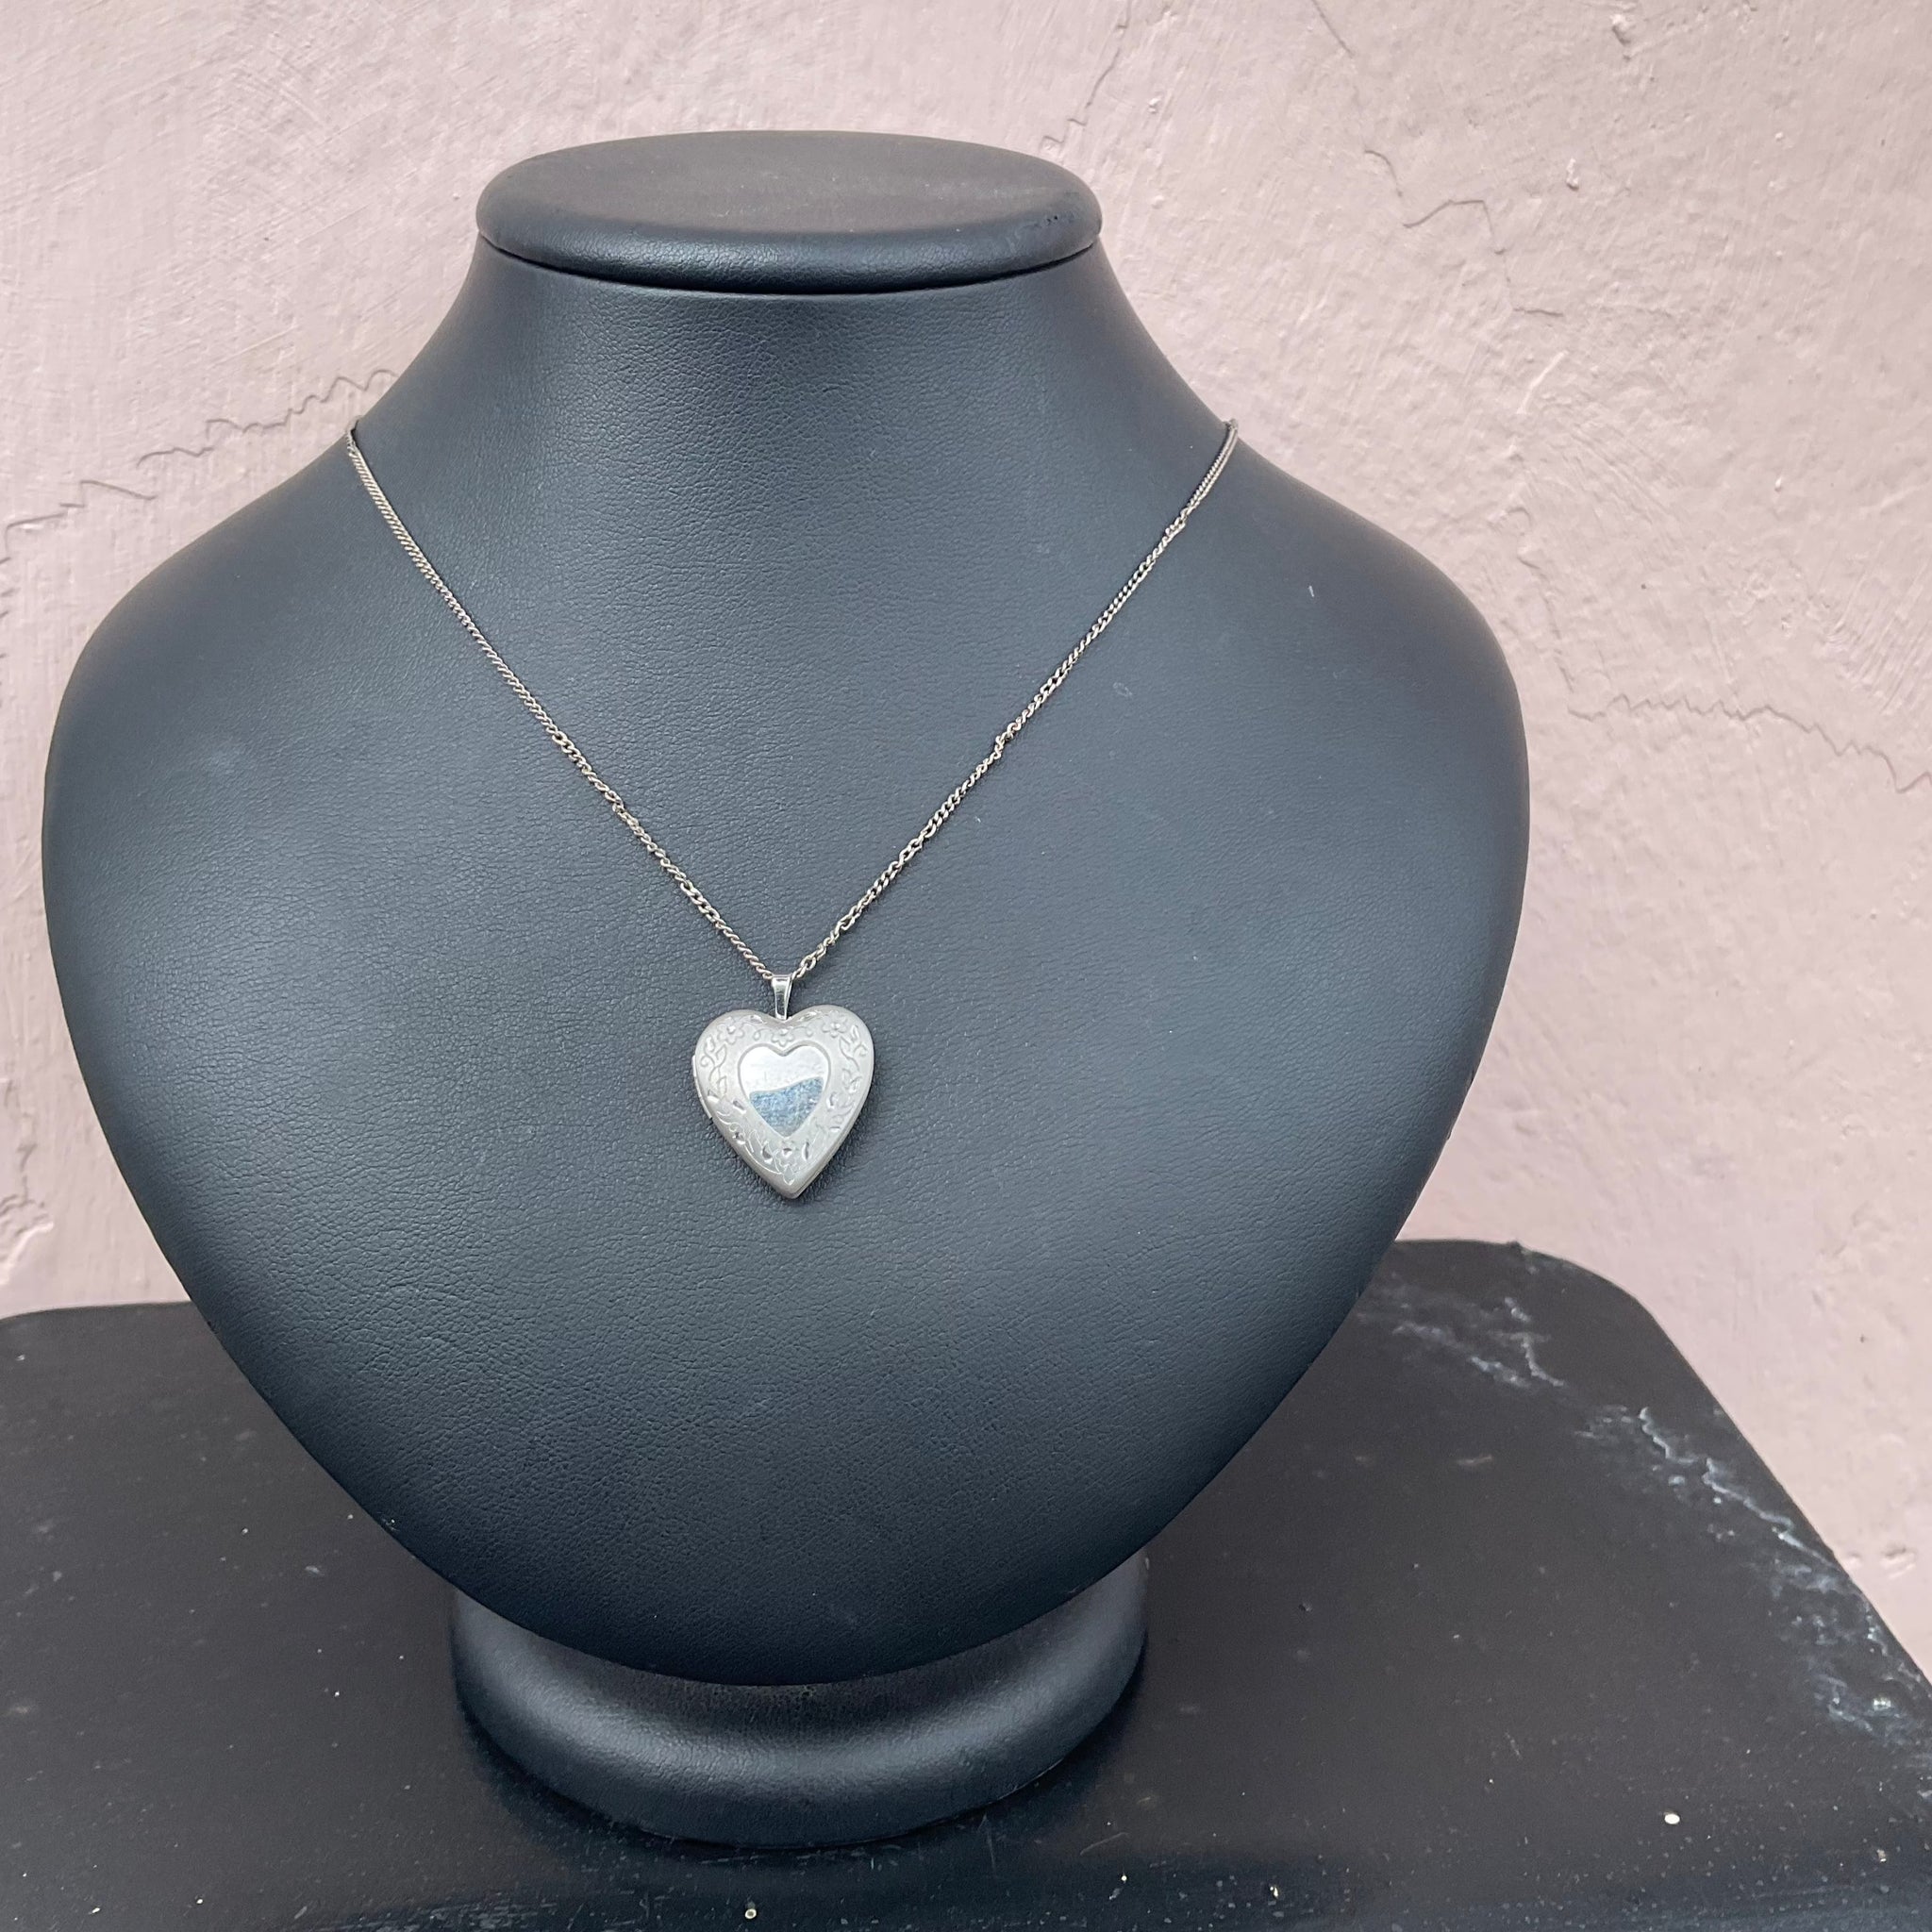 Vintage Silver Engraved Heart Locket and Chain